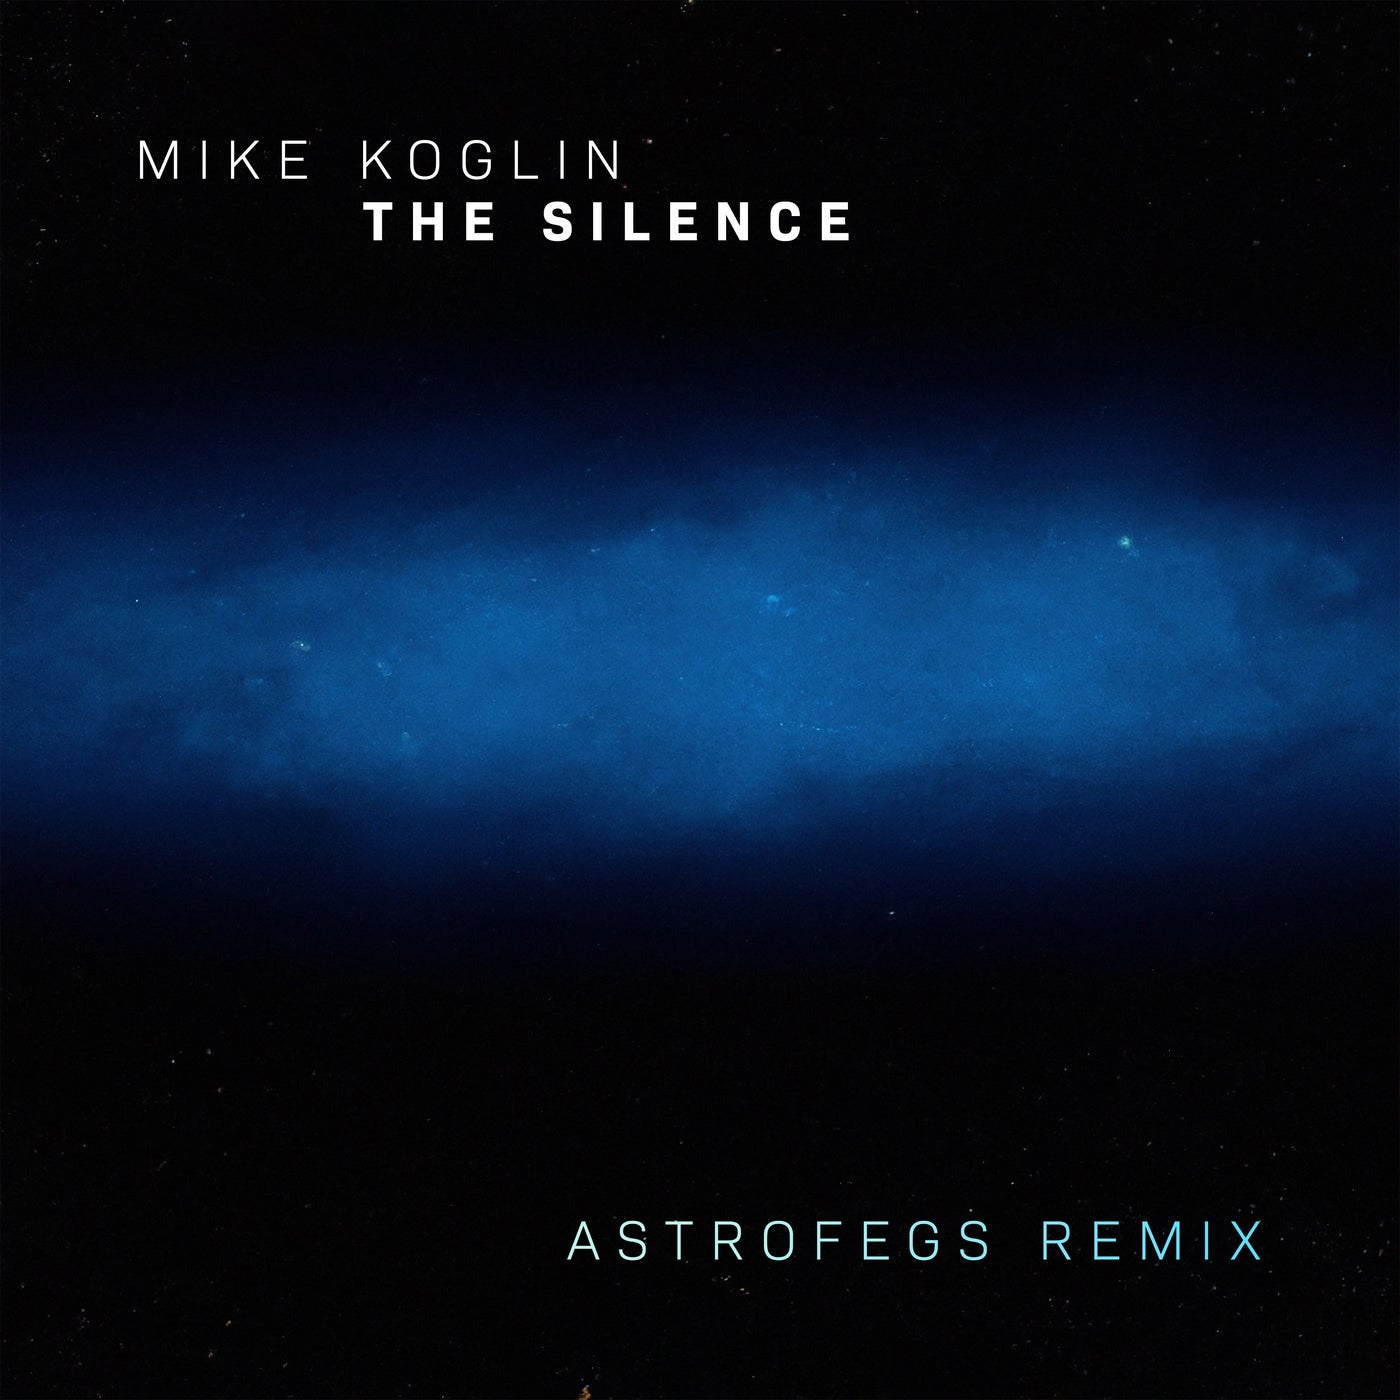 The Silence (AstroFegs Remix)